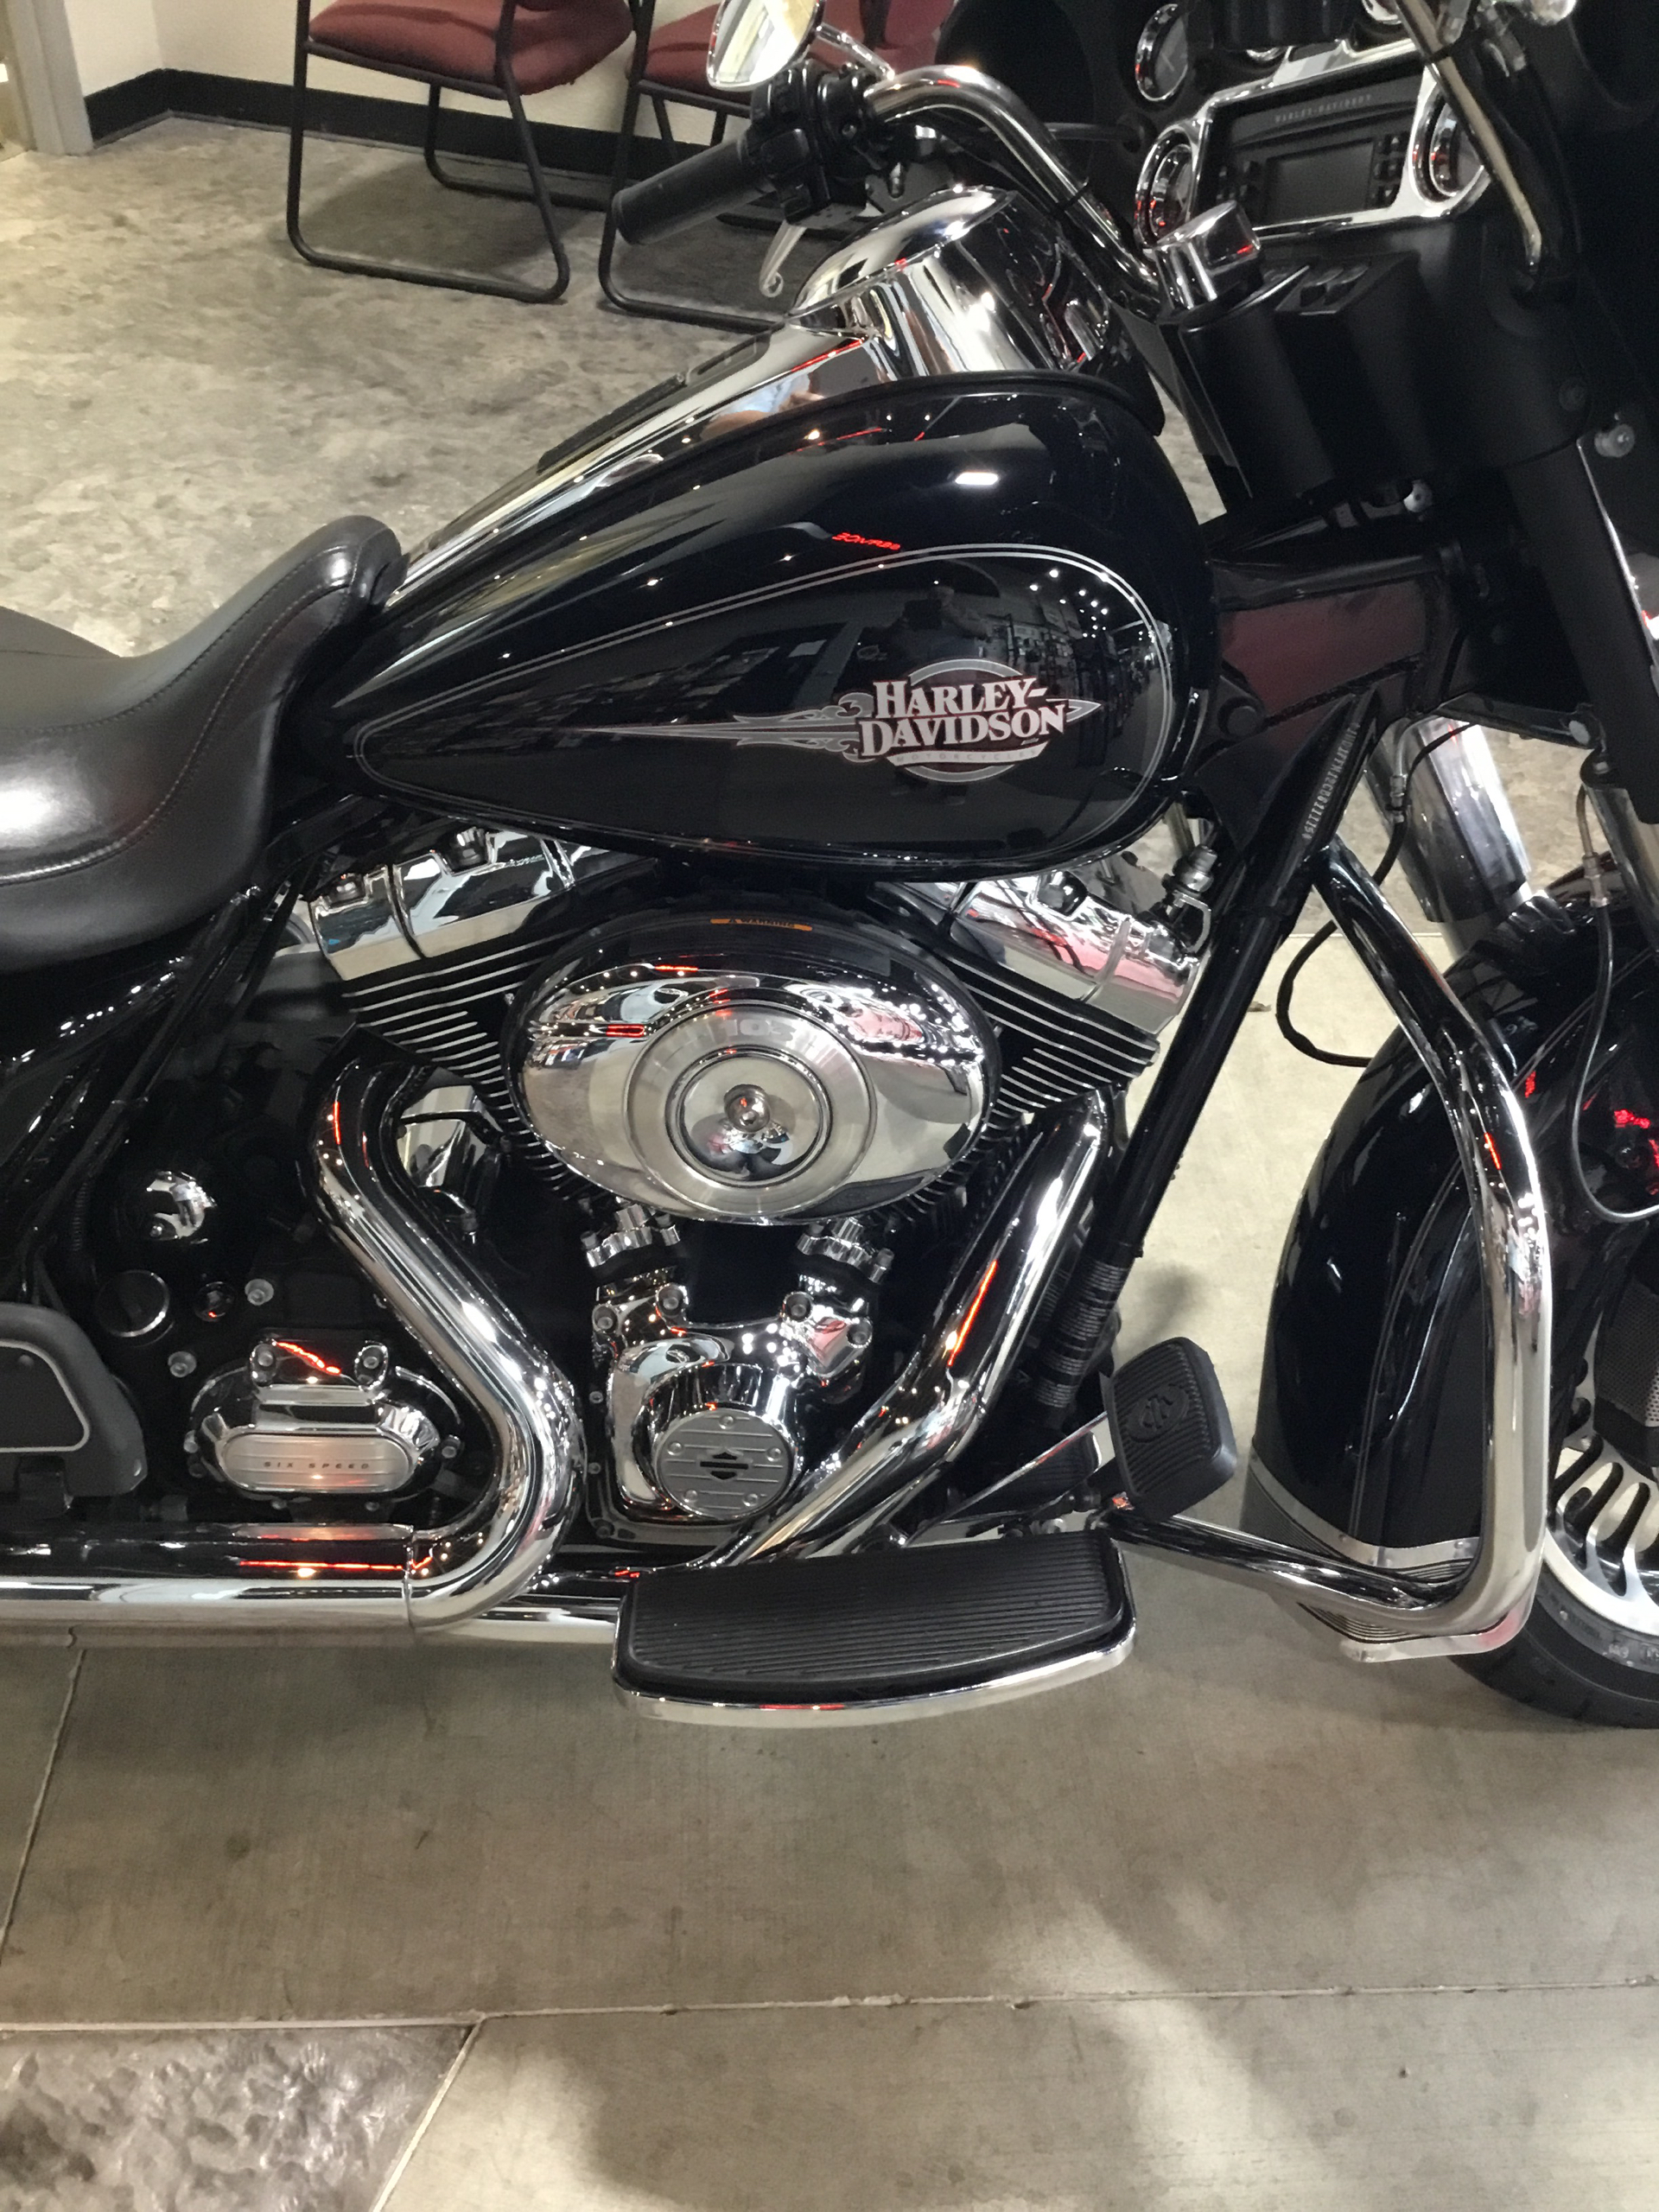 Used 2012 Harley-Davidson Electra Glide® Classic Motorcycles in 